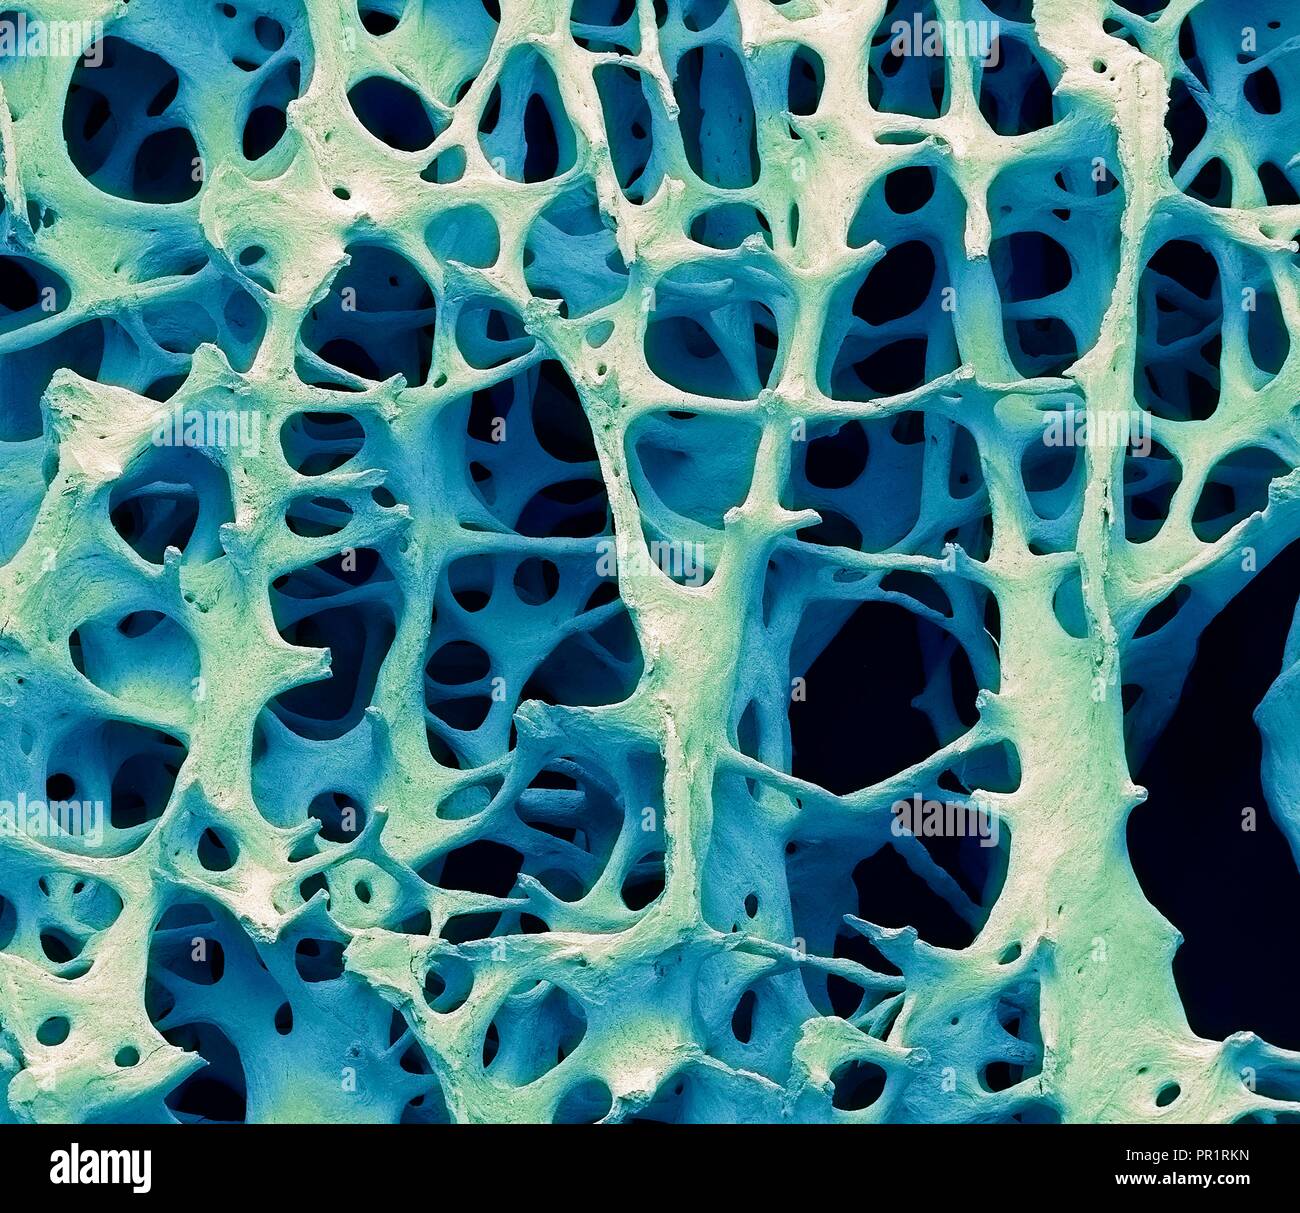 Bone tissue. Coloured scanning electron micrograph (SEM) of human cancellous (spongy) bone. Bone tissue can be either cortical (compact) or cancellous. Cortical bone usually makes up the exterior of the bone, while cancellous bone is found in the interior. Cancellous bone is characterised by a honeycomb arrangement, comprising a network of trabeculae (rod-shaped tissue). These structures provide support and strength to the bone. The spaces within this tissue contain bone marrow (not seen), a blood forming substance. Magnification: x13 when printed 10cm wide. Stock Photo